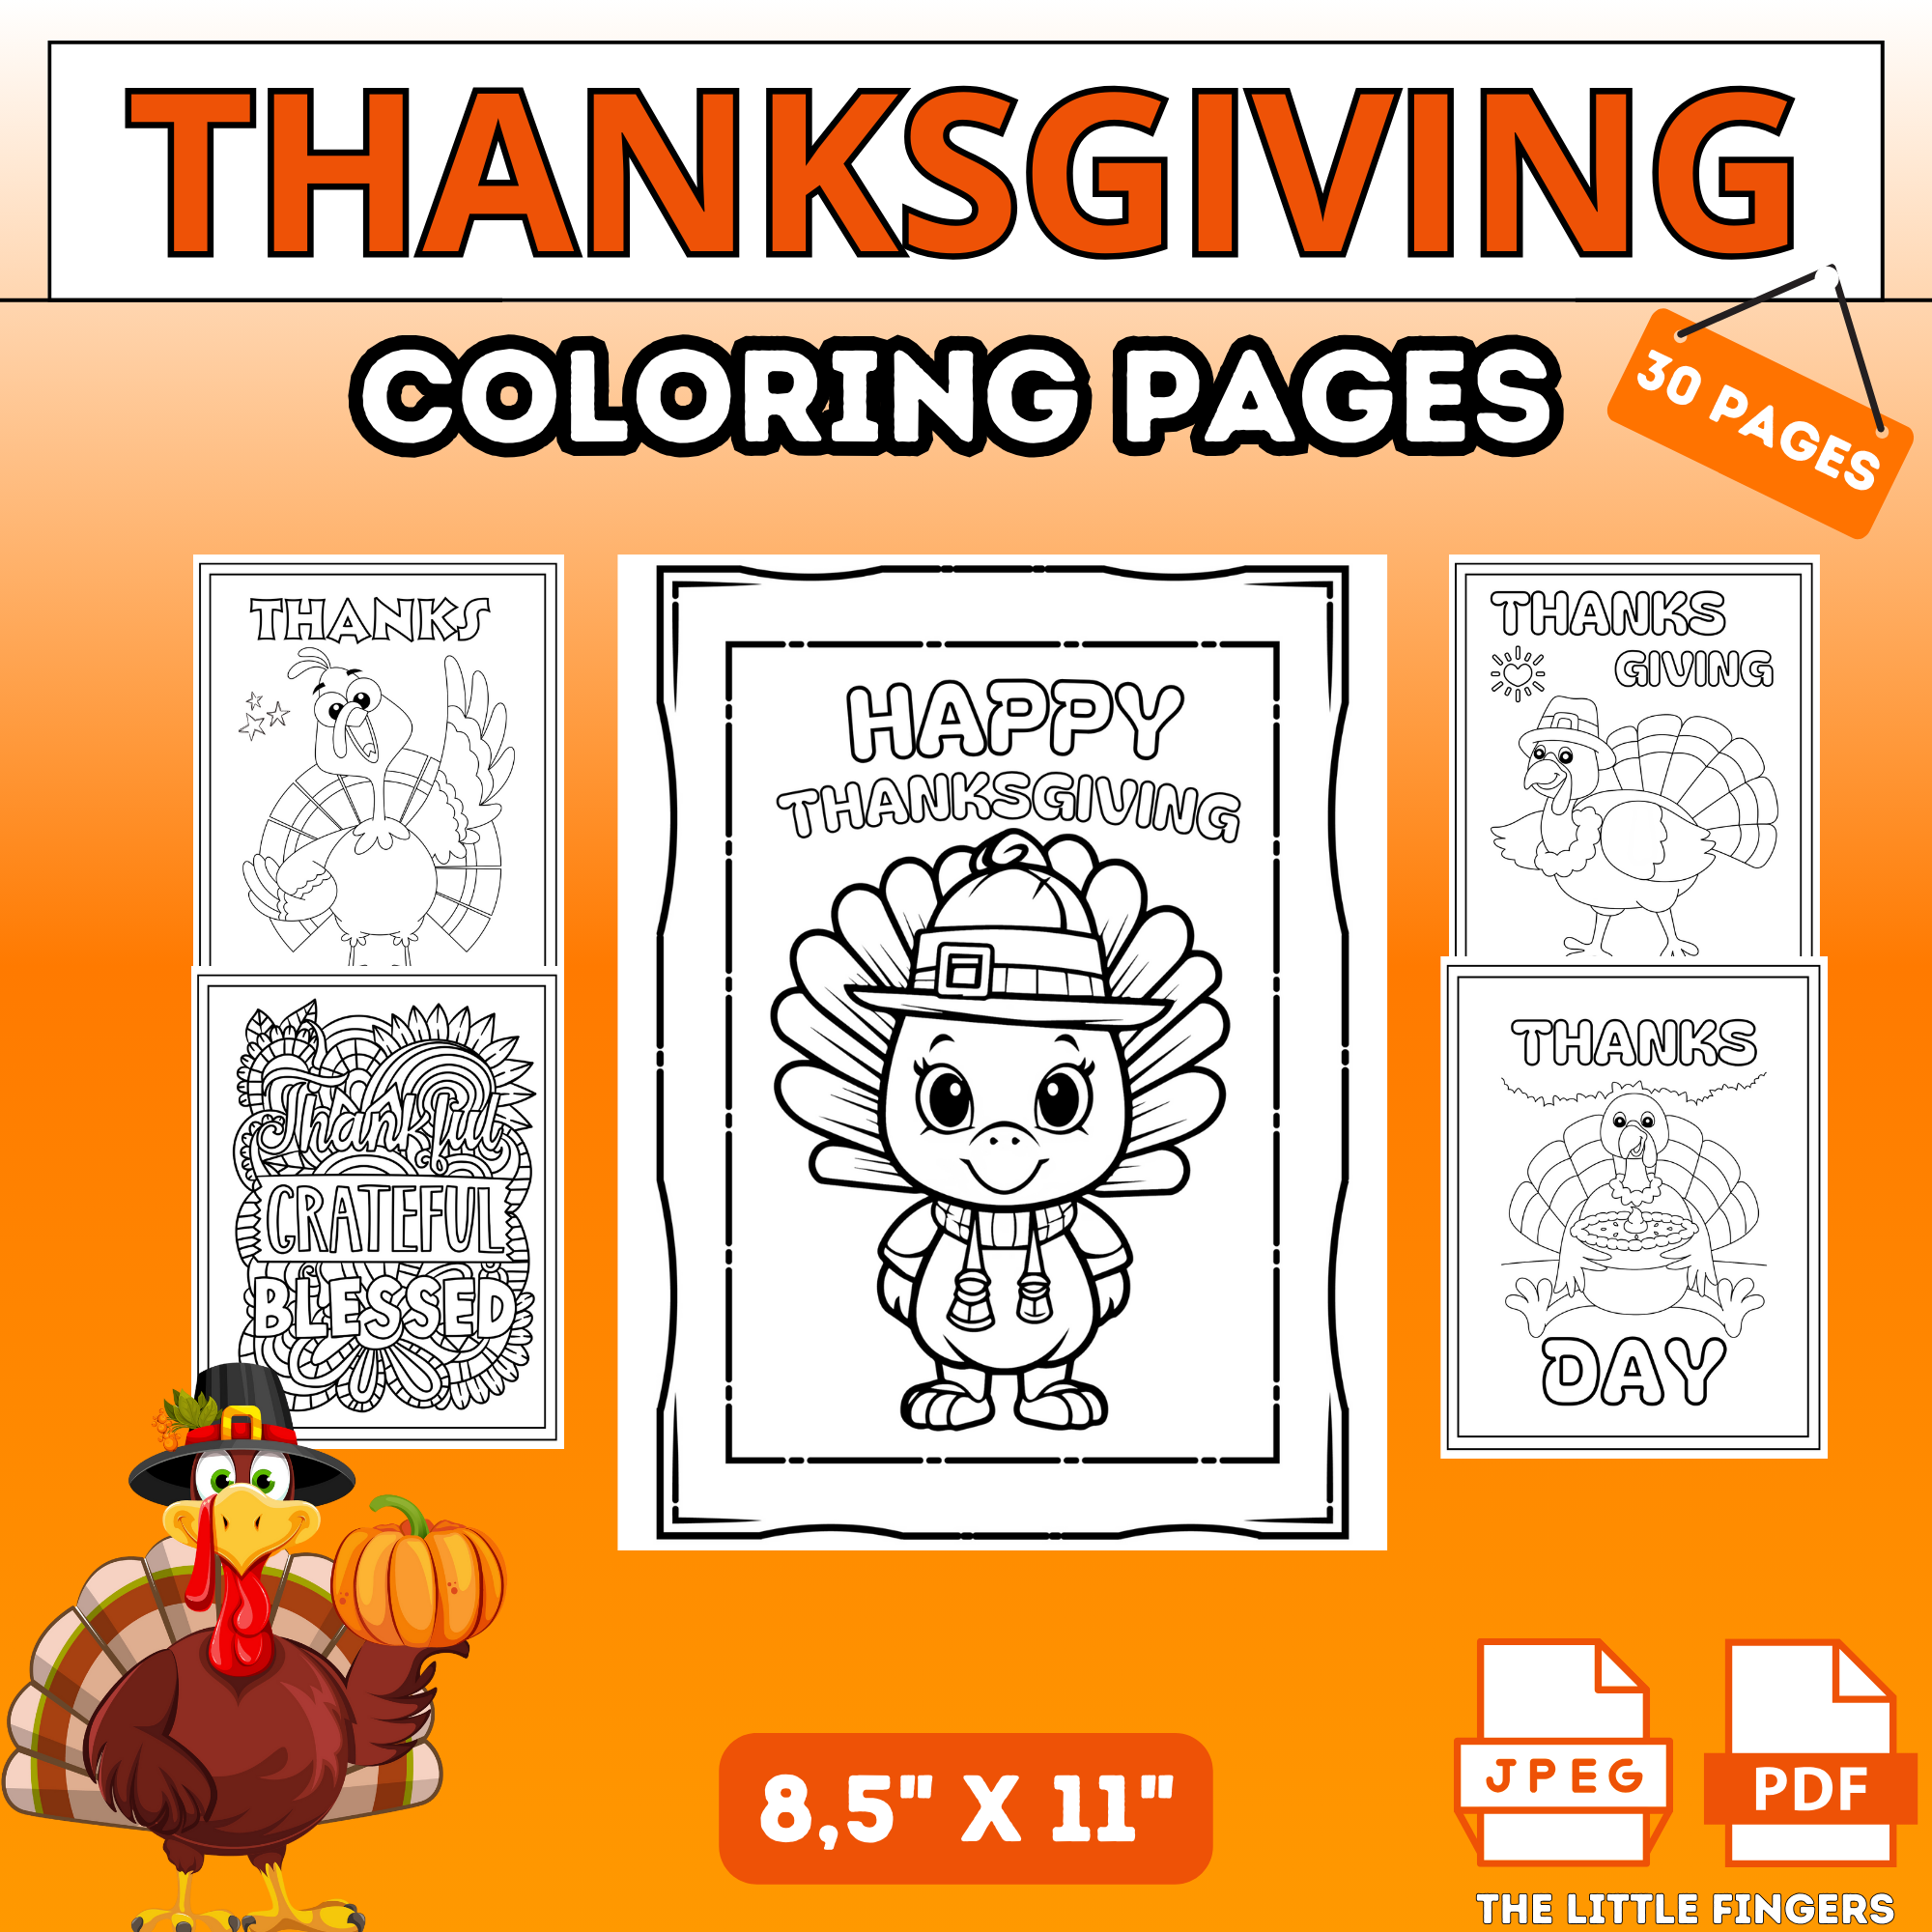 Thanksgiving turkey coloring sheets printable fall activity made by teachers